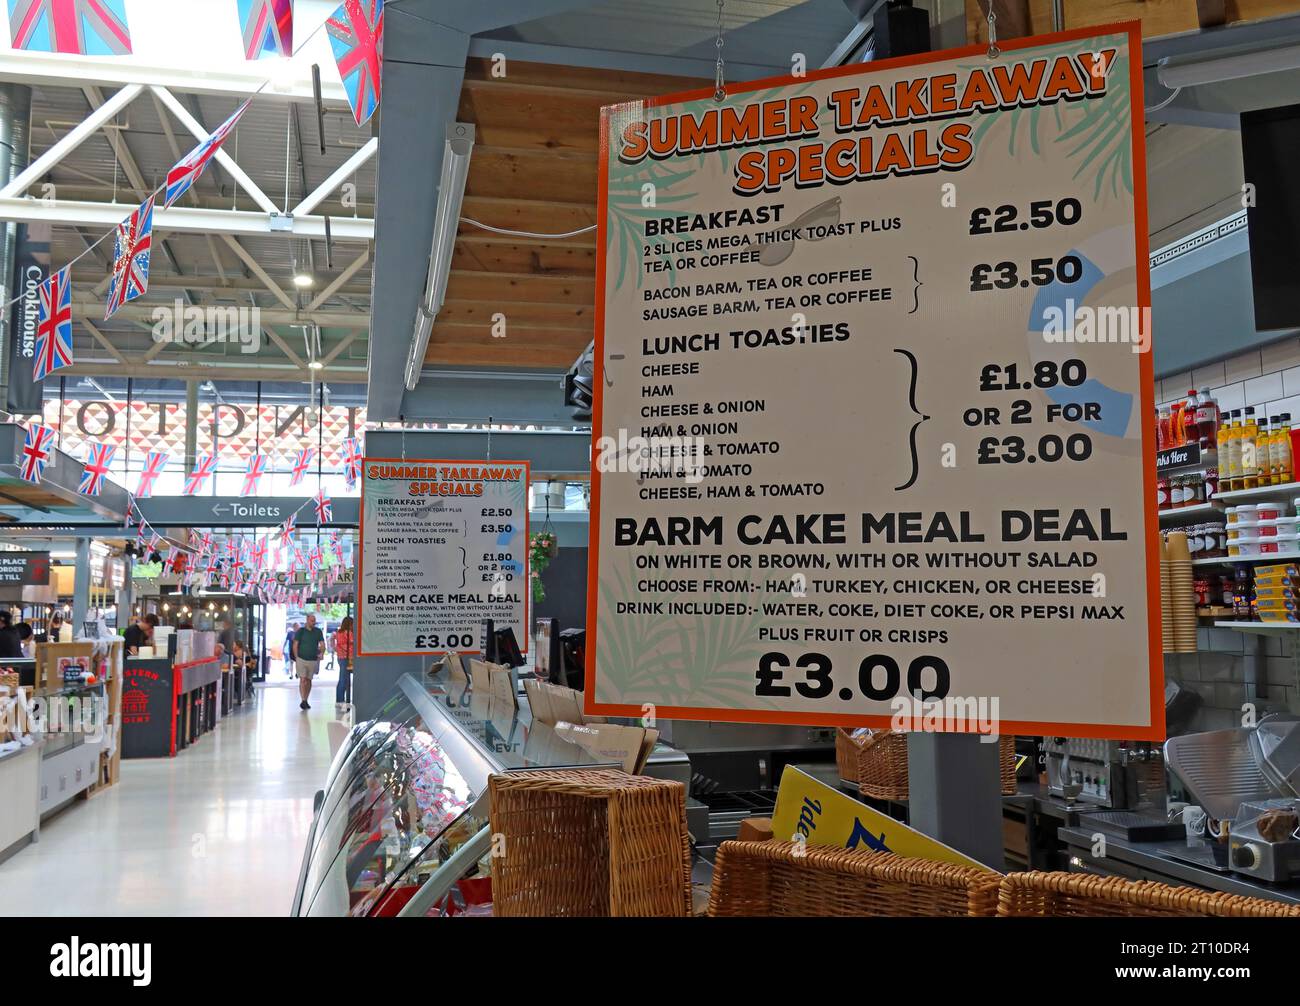 Summer Takeaway Specials - Barm Cake Meal Deal - colazione , Lunch Toasties at Time Square, Warrington Market, Cheshire, WA1 2HN Foto Stock